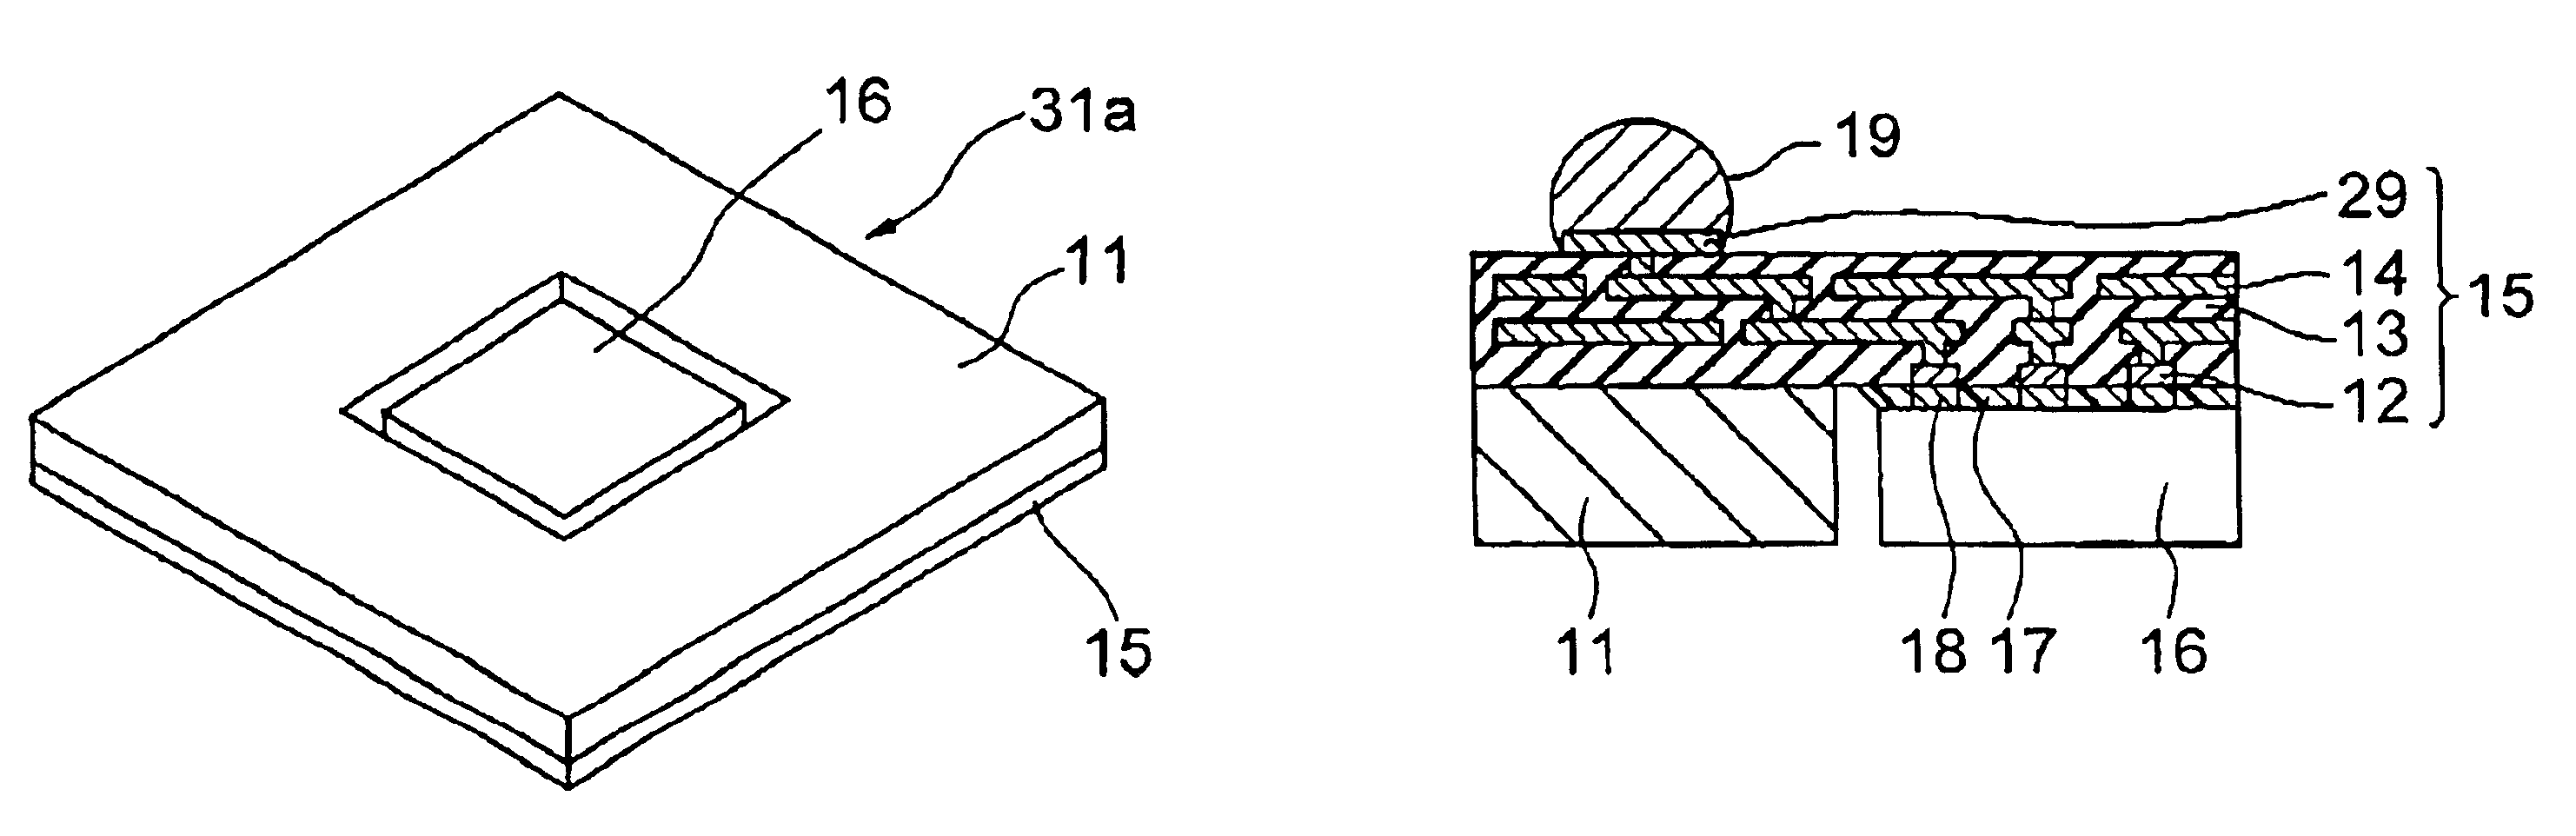 Semiconductor package board using a metal base